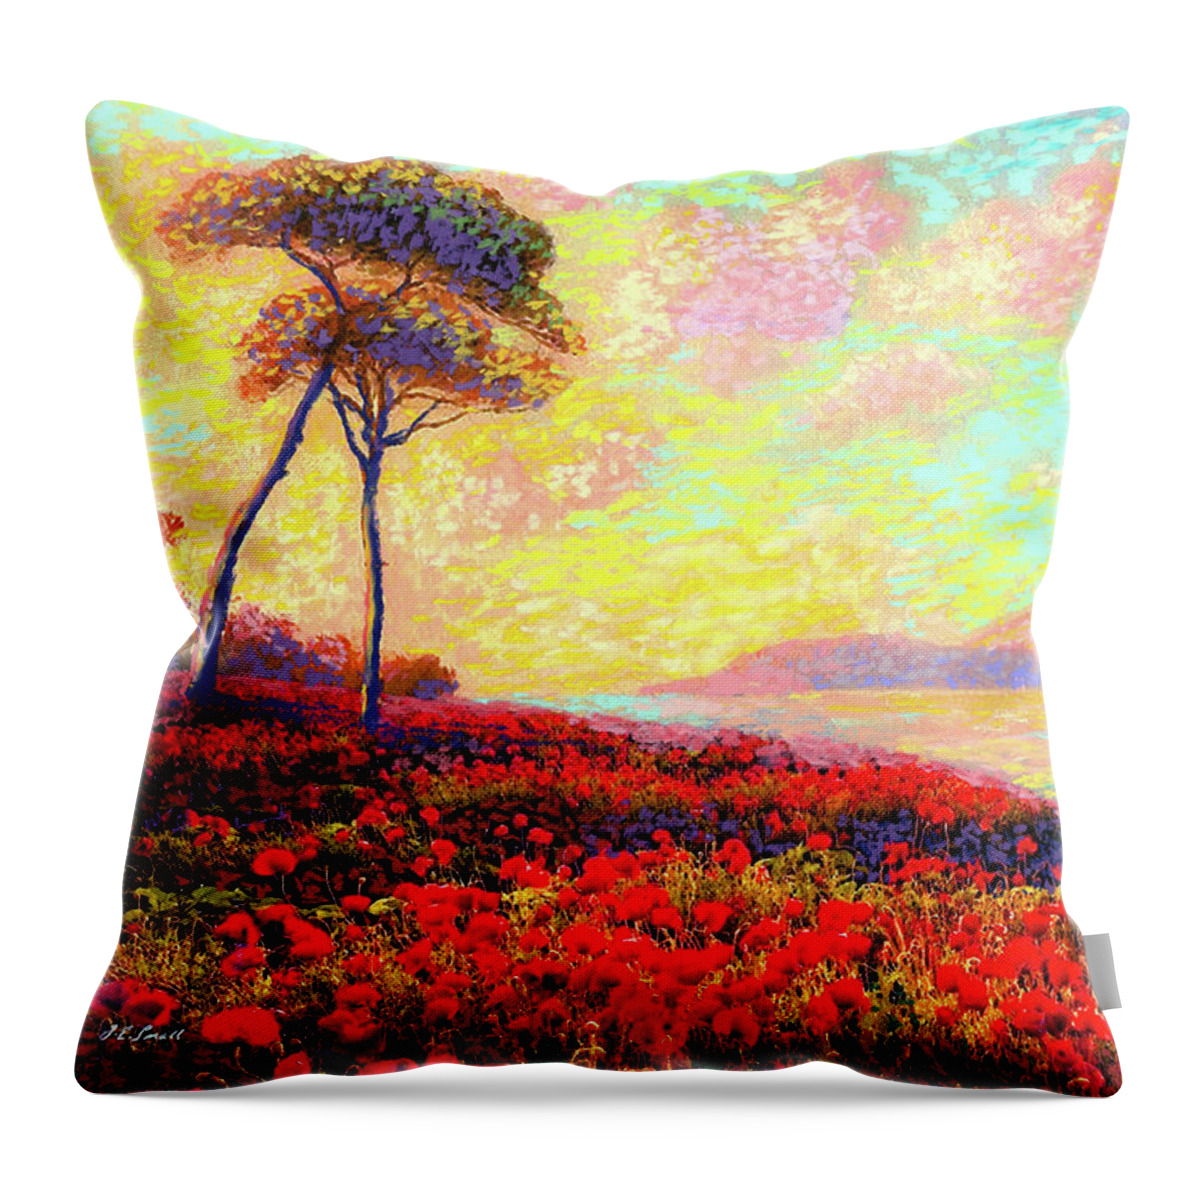 Floral Throw Pillow featuring the painting Enchanted by Poppies by Jane Small